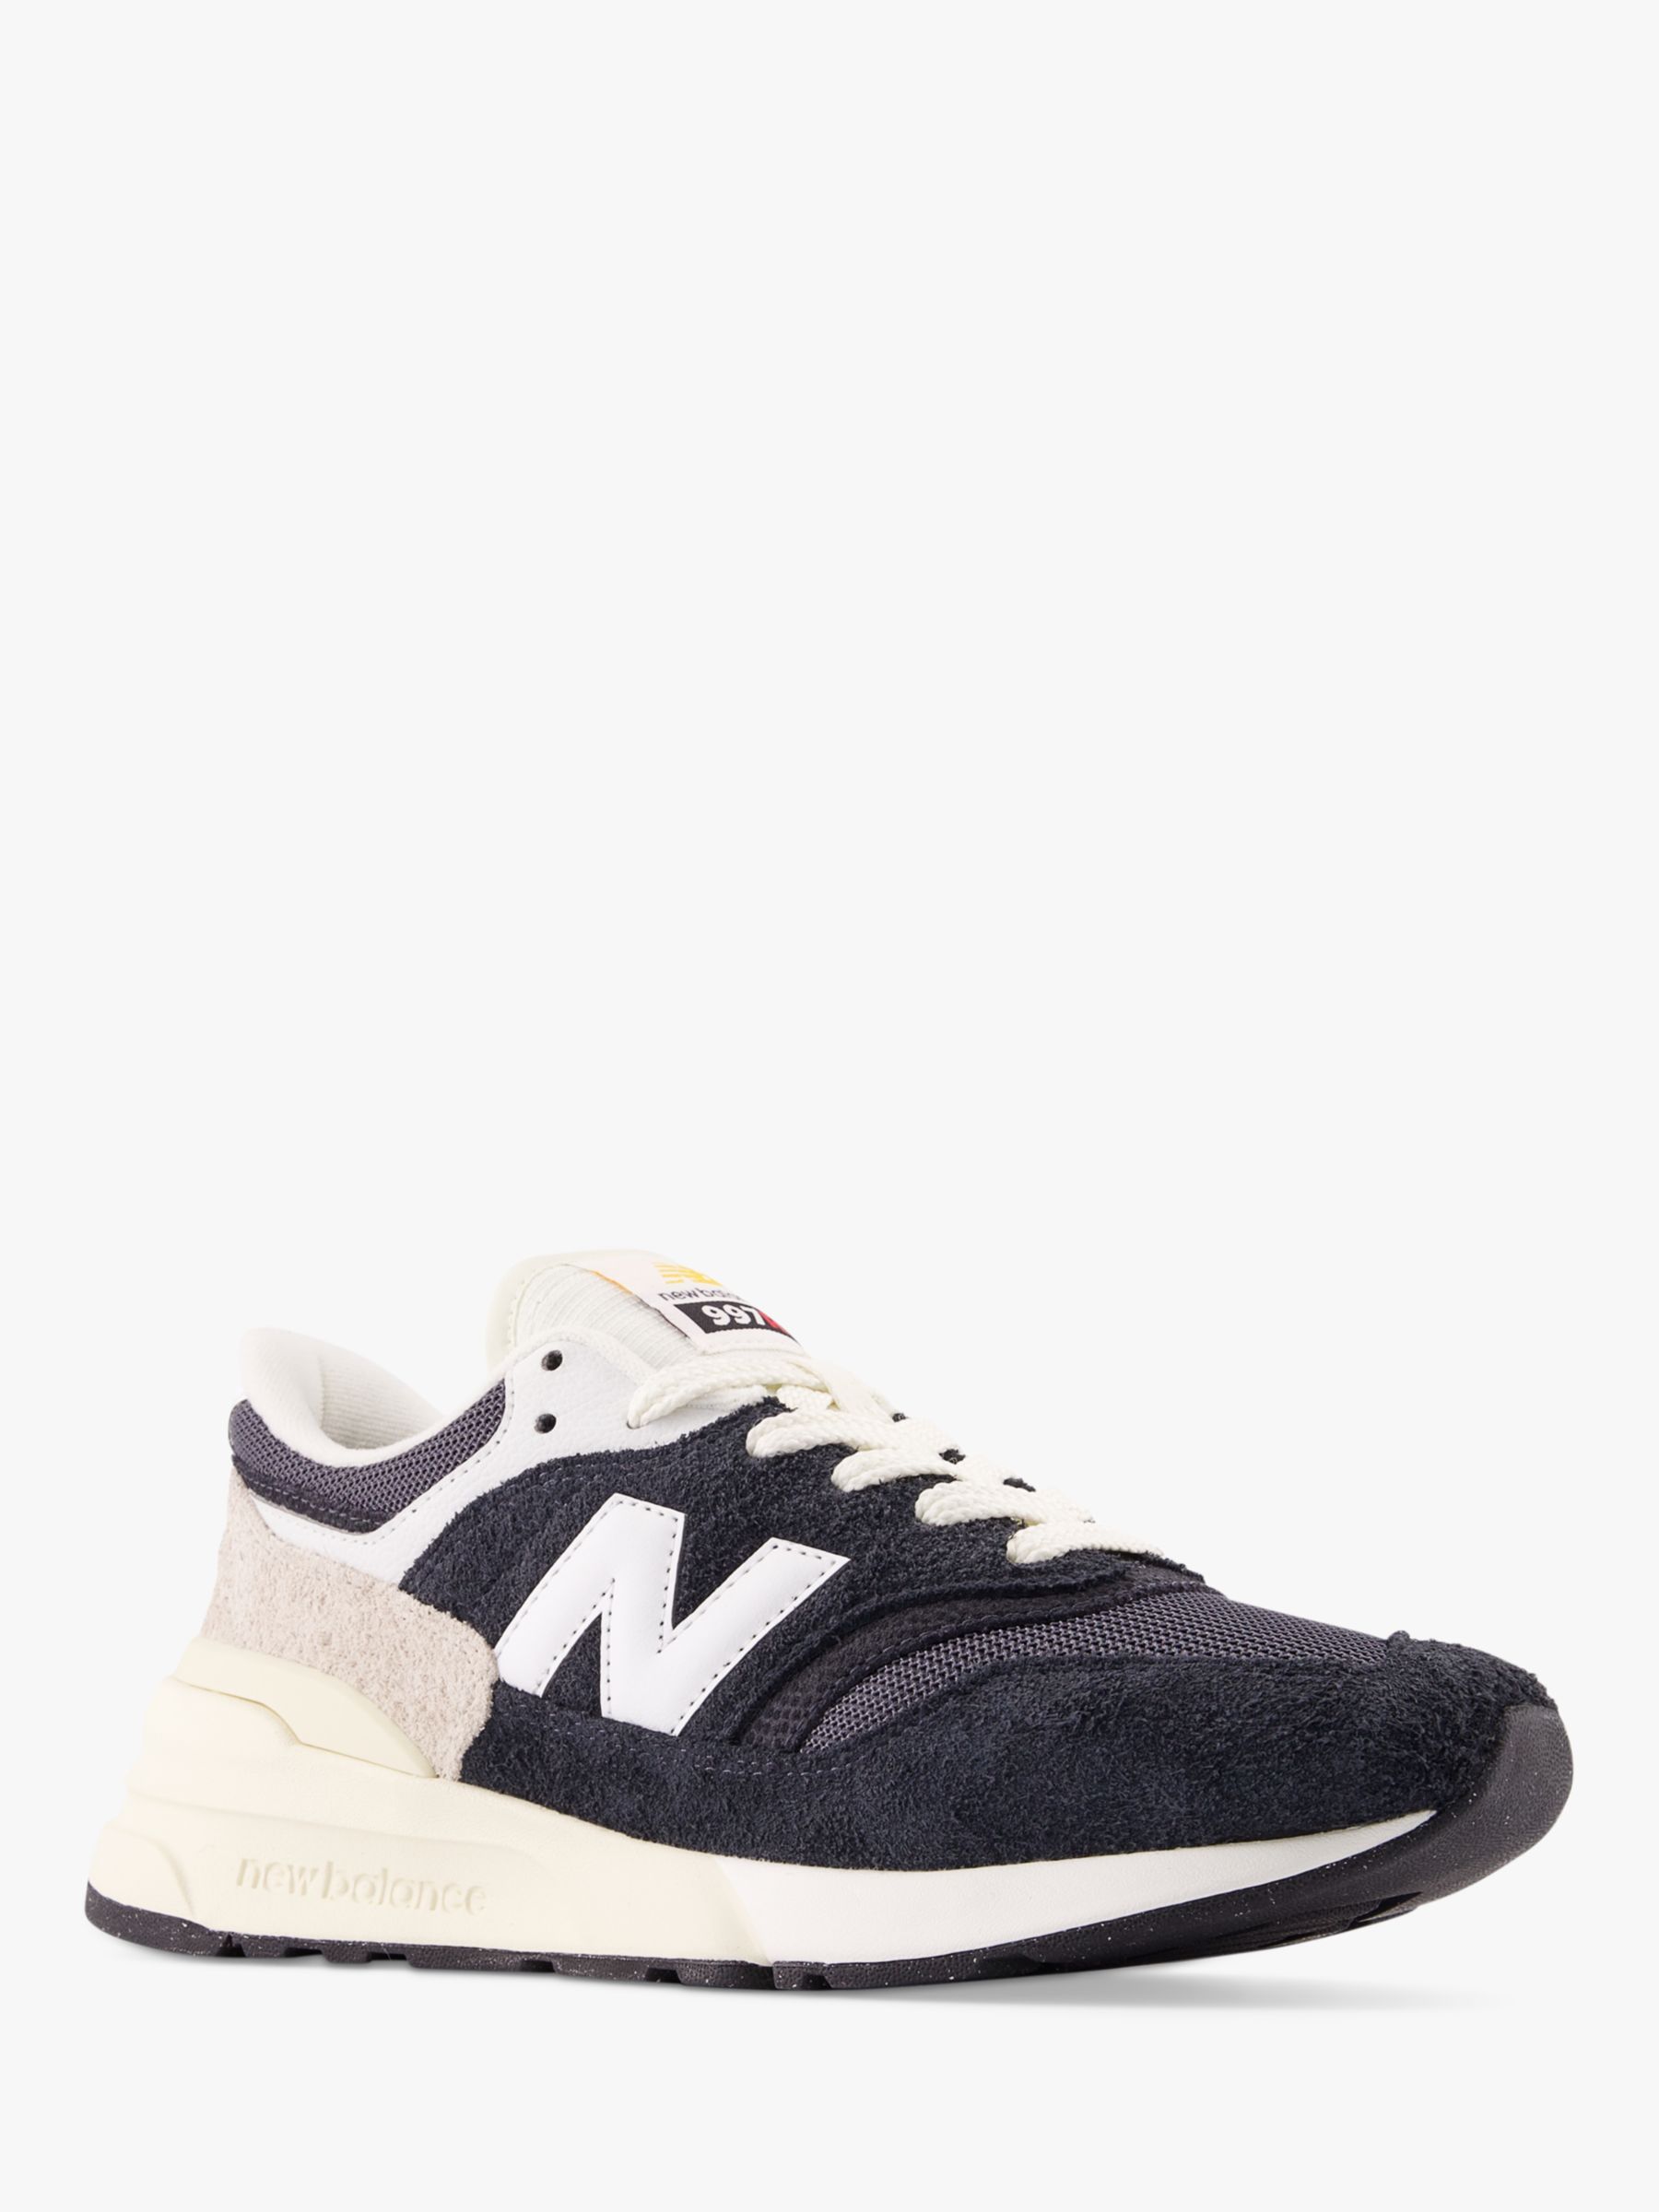 Buy New Balance 997R Men's Suede Trainers Online at johnlewis.com